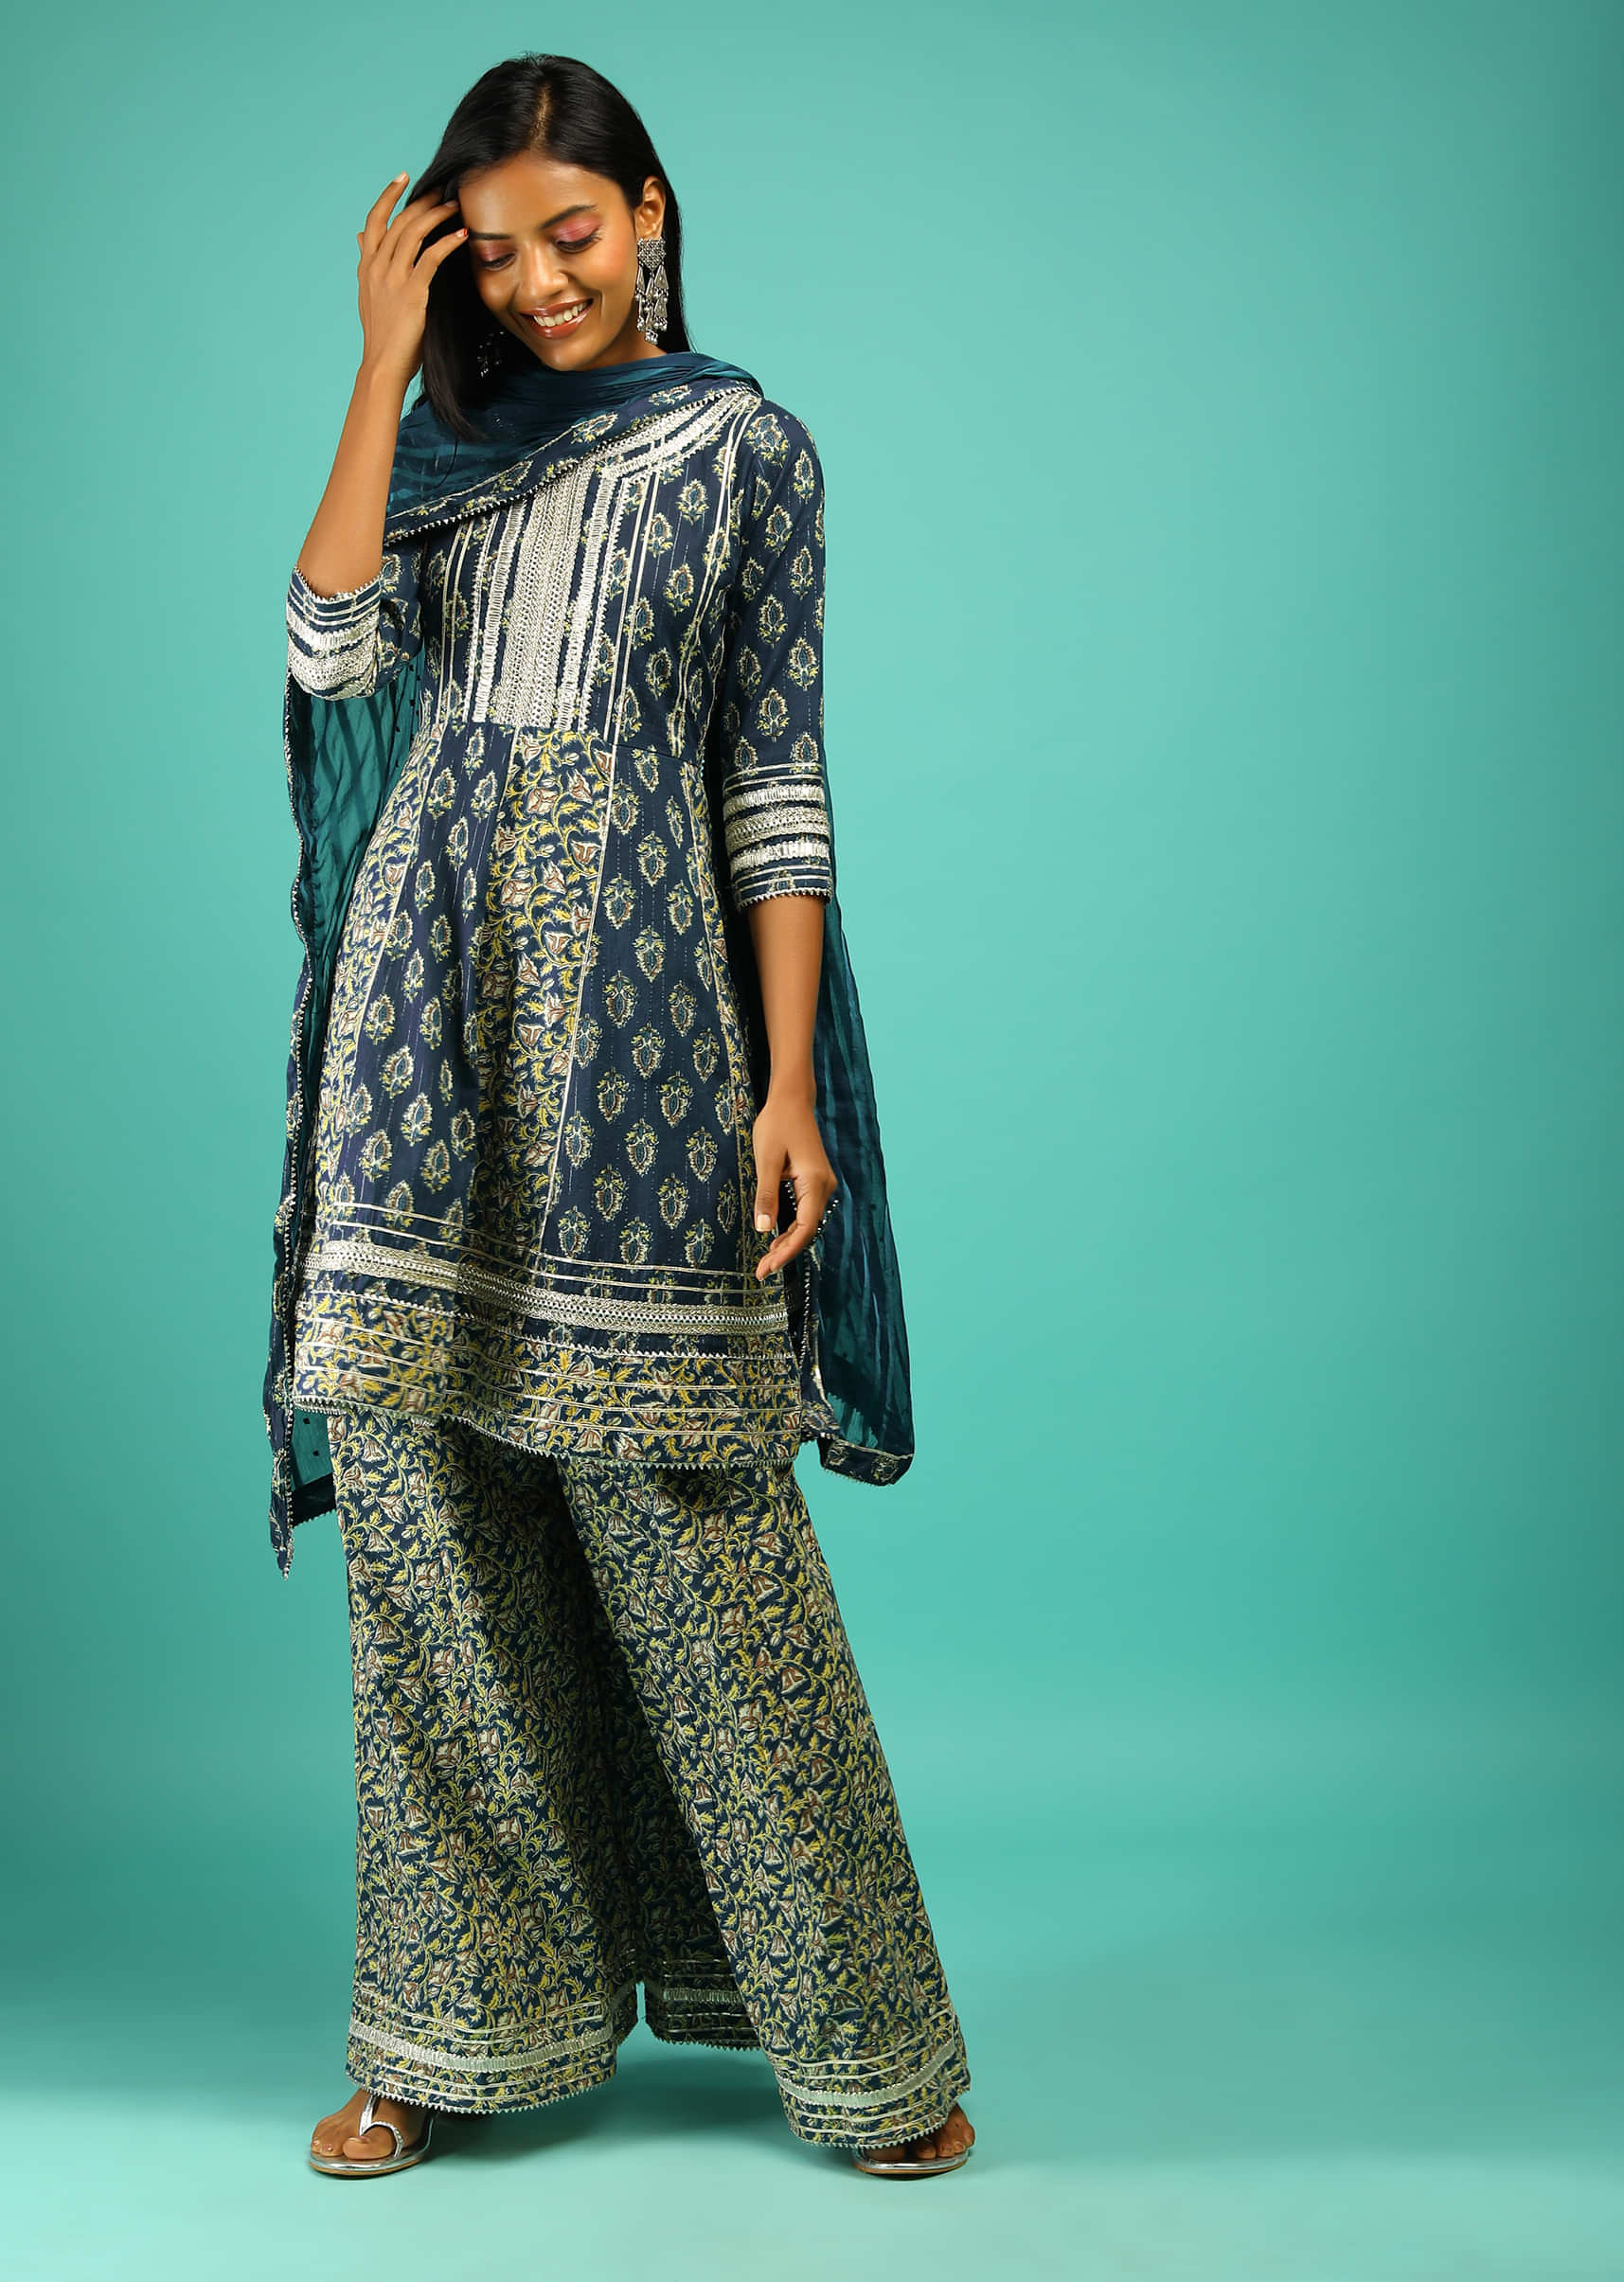 Peacock Blue Sharara Suit In Cotton With Multi Colored Block Printed Floral Buttis And Gotta Lace Work